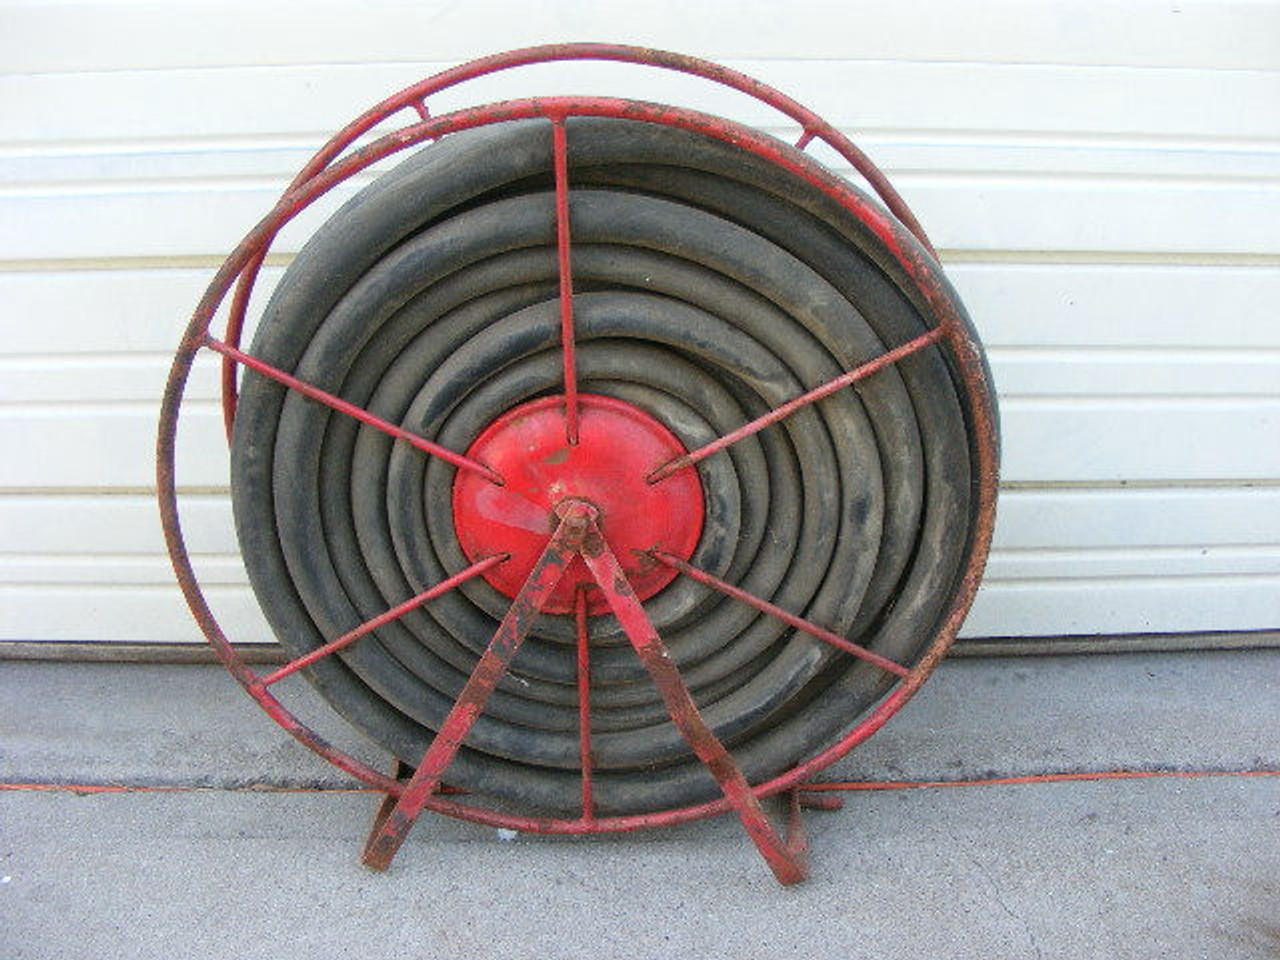 An old firefighting fire hose and reel measuring 27" x 7 1